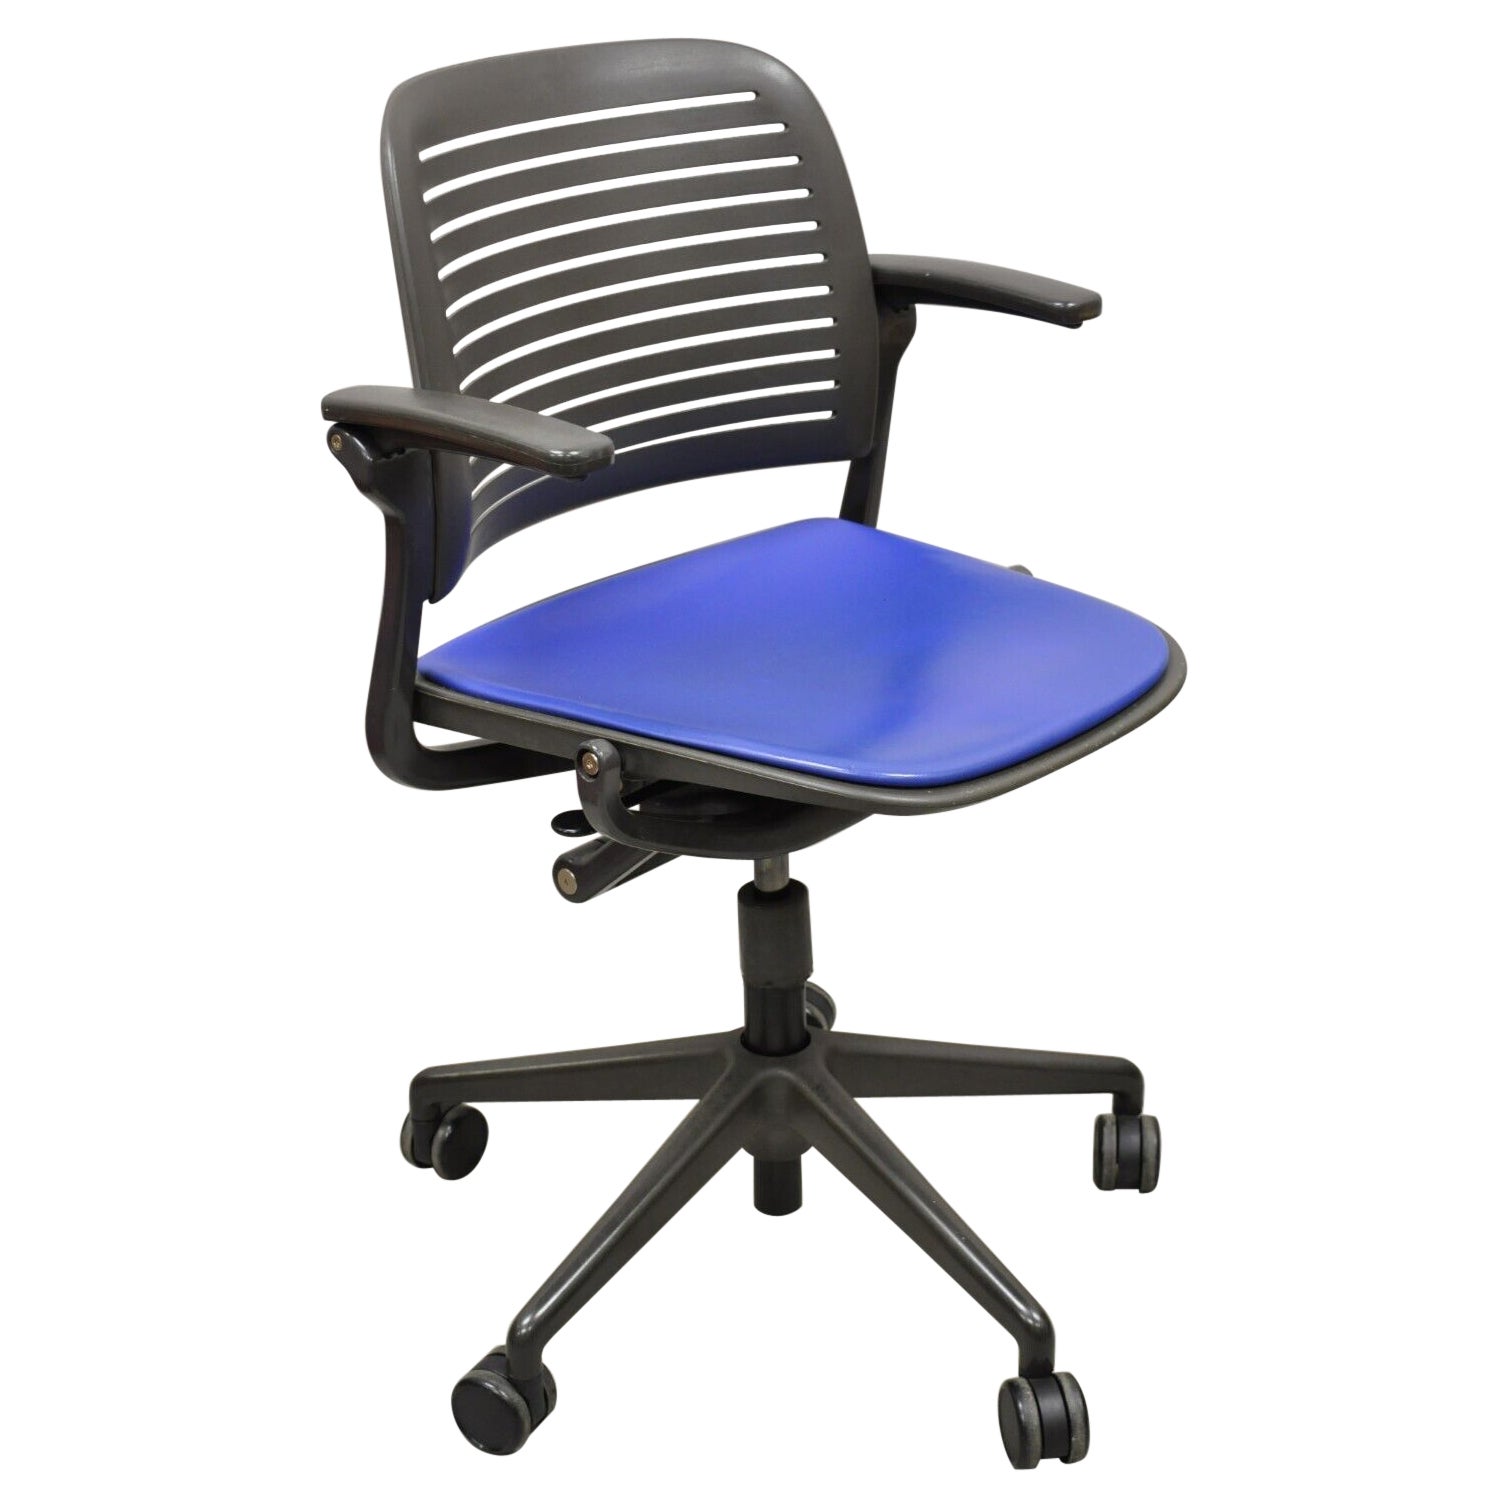 Steelcase 487 Cachet Swivel Office Desk Chair with Blue Seat For Sale